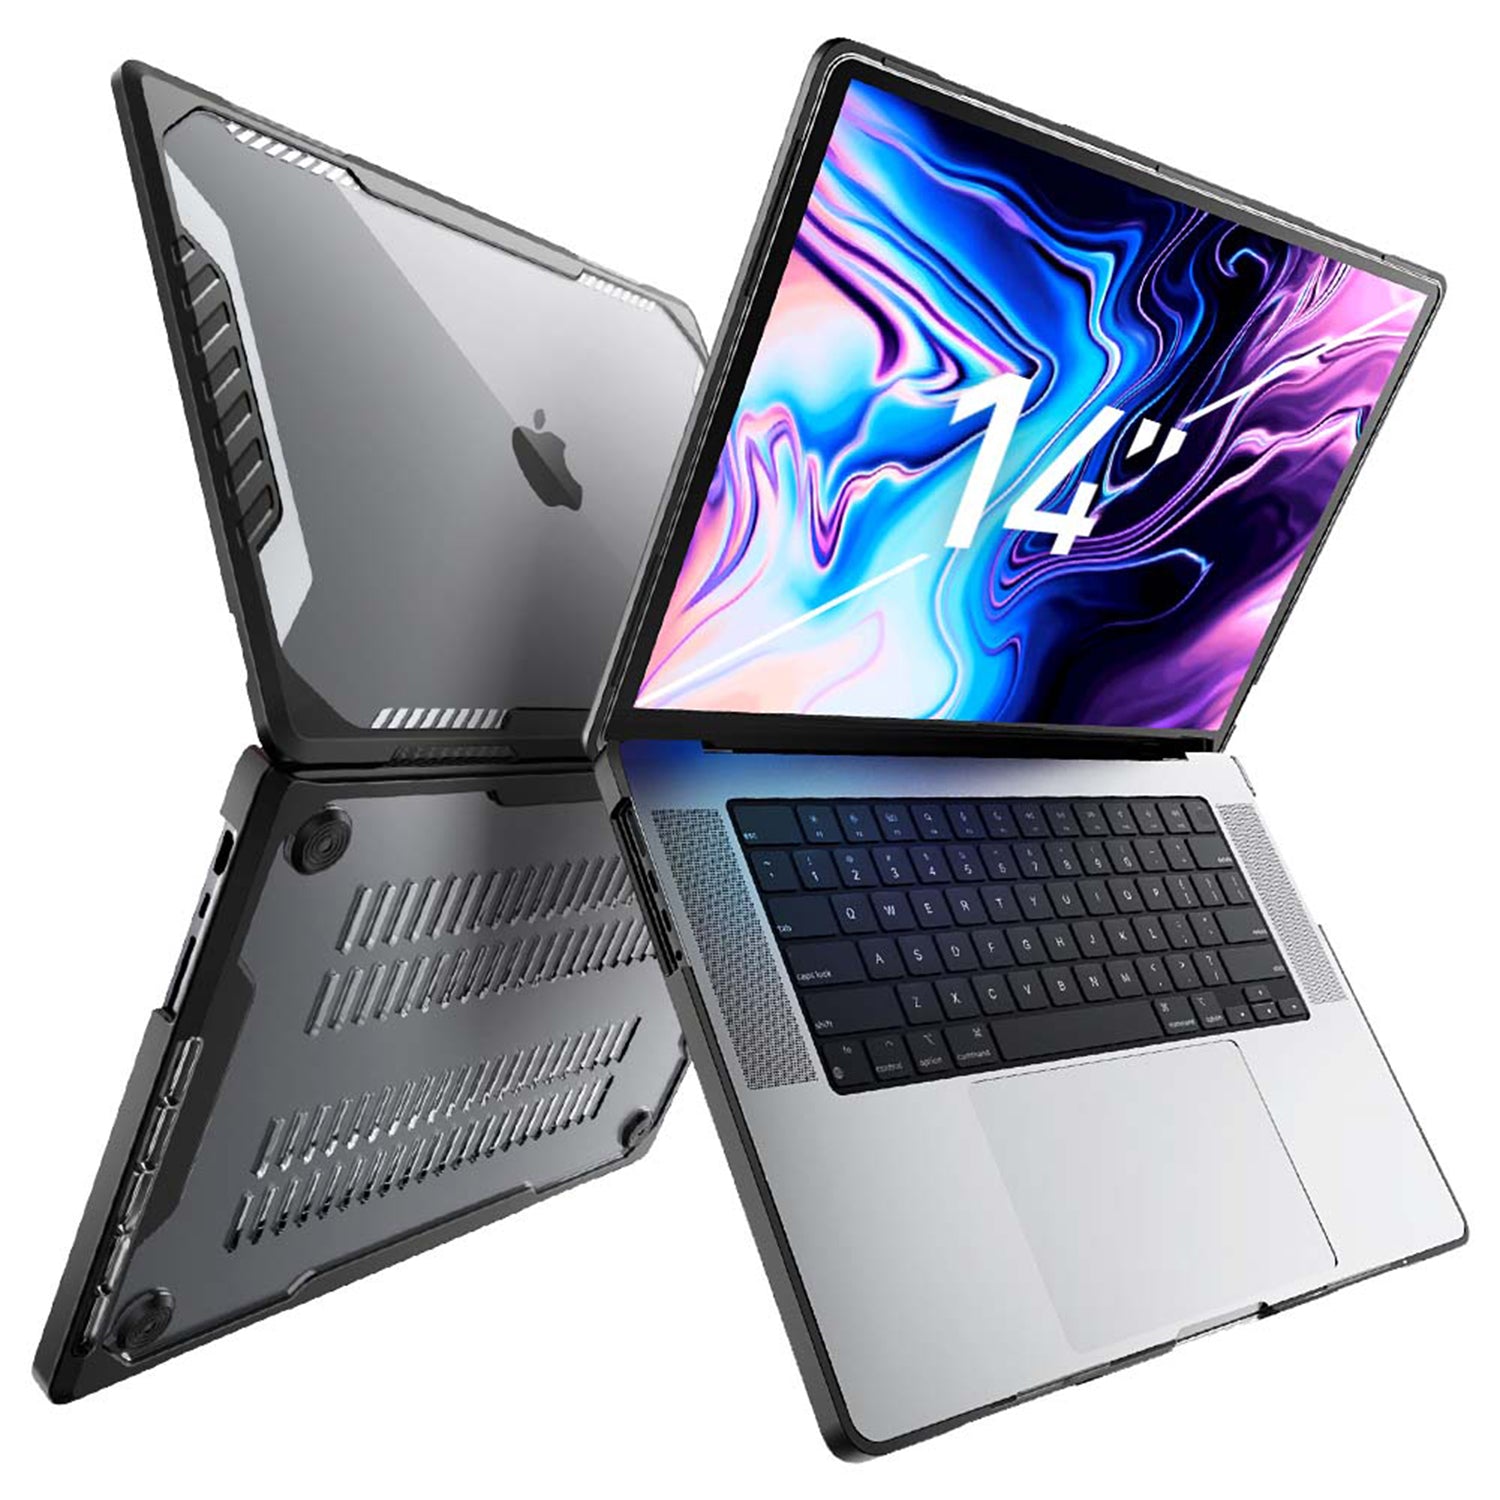 Supcase Unicorn Beetle Series Dual Layer Hard Shell Protective Cover Case for MacBook Pro 14 Inch (2021 Release) A2442 M1 Pro / M1 Max Default Supcase Black 